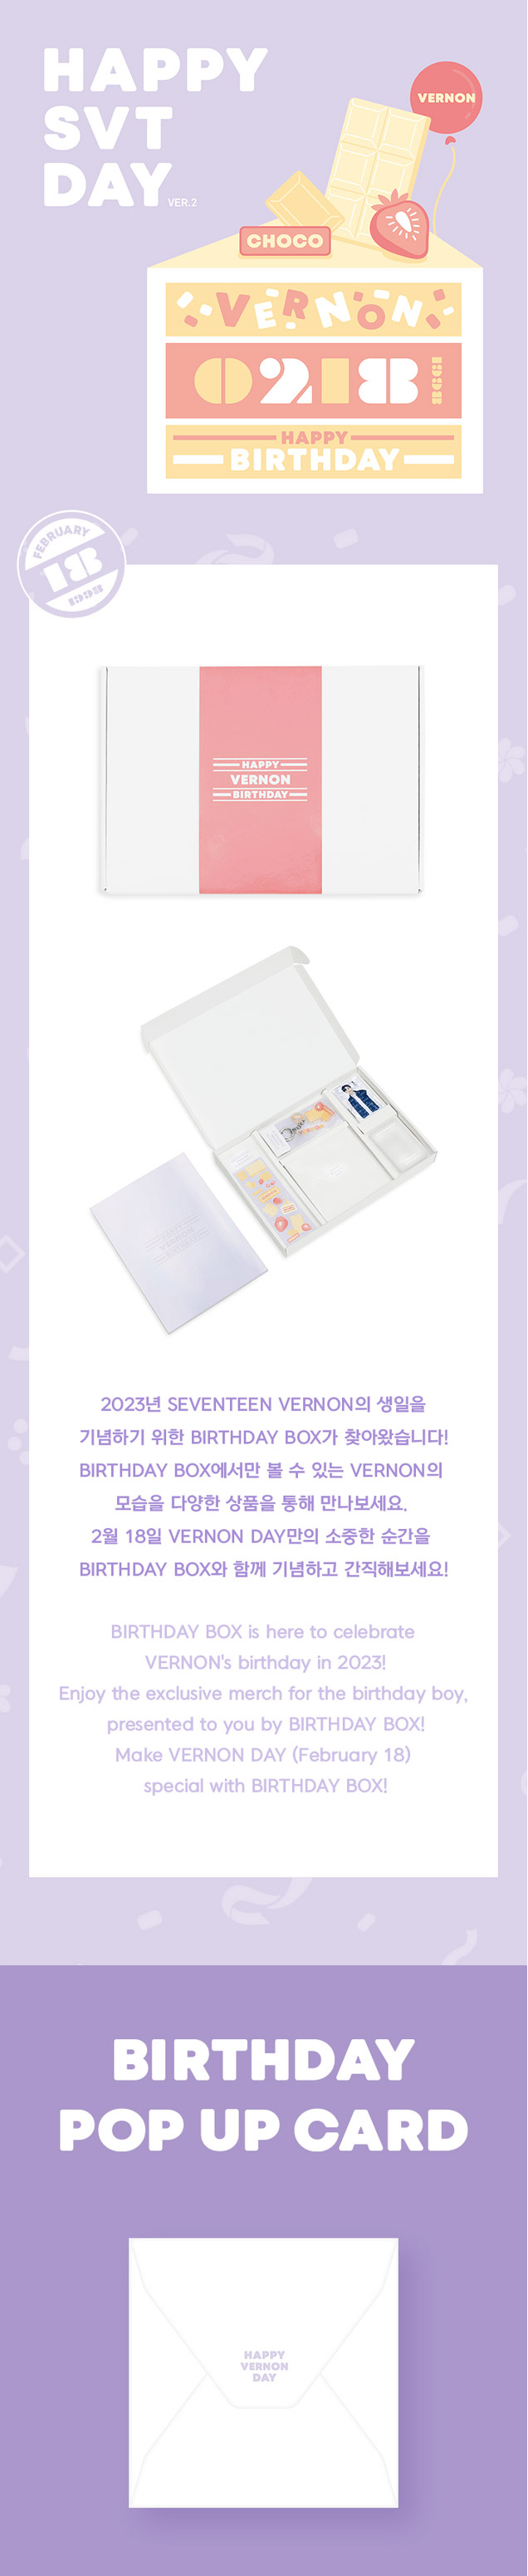 HAPPY VERNON DAY BIRTHDAY PACKAGE